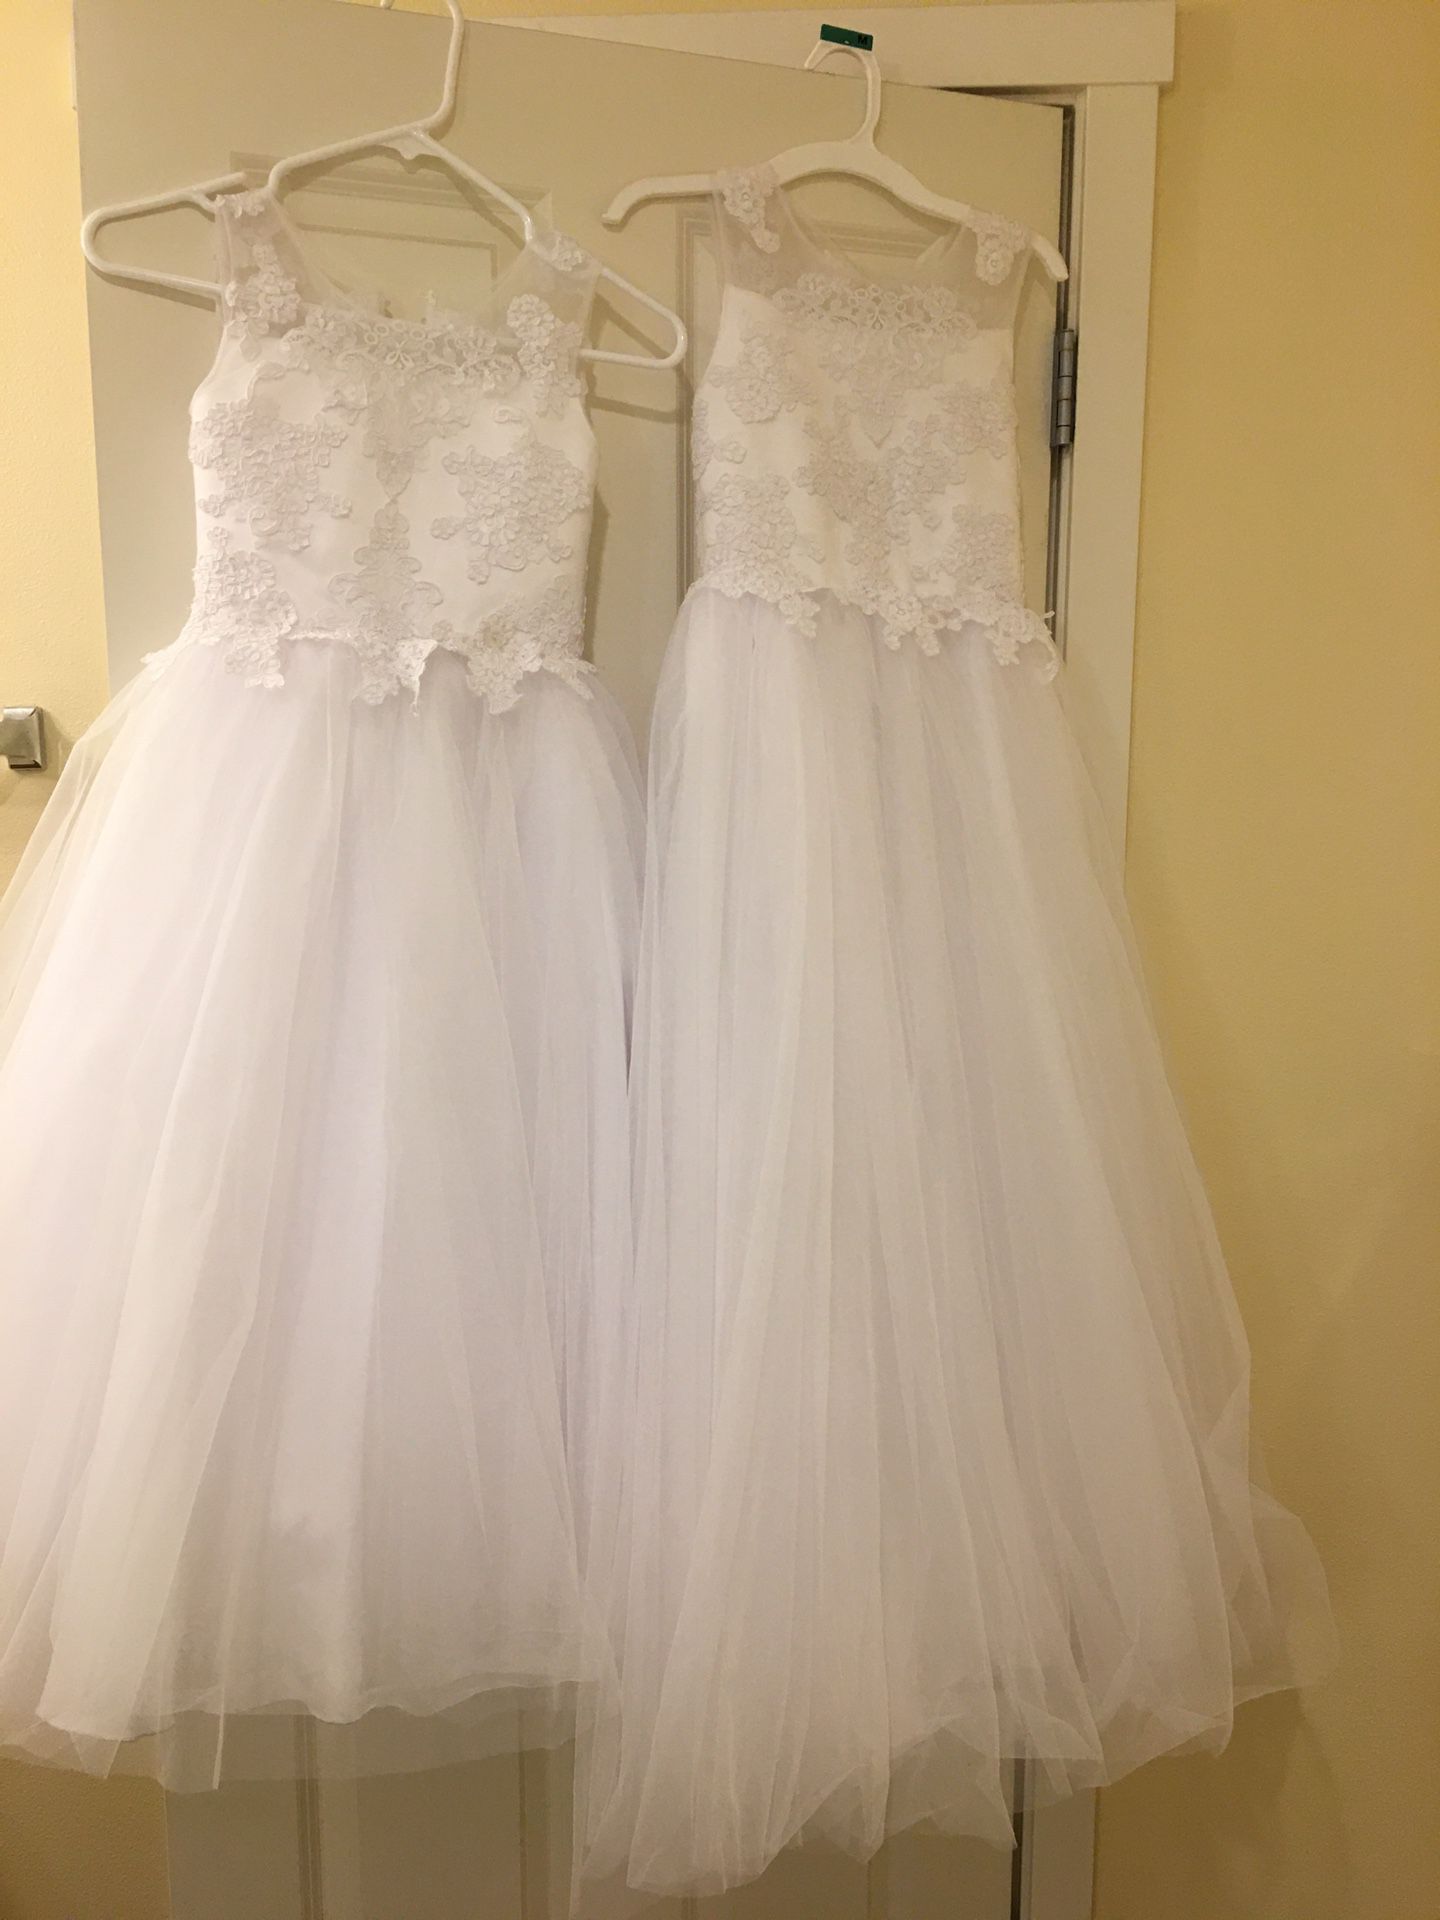 Flower girl dress size 6/7 and 8/9(might fit 10 if on smaller side)